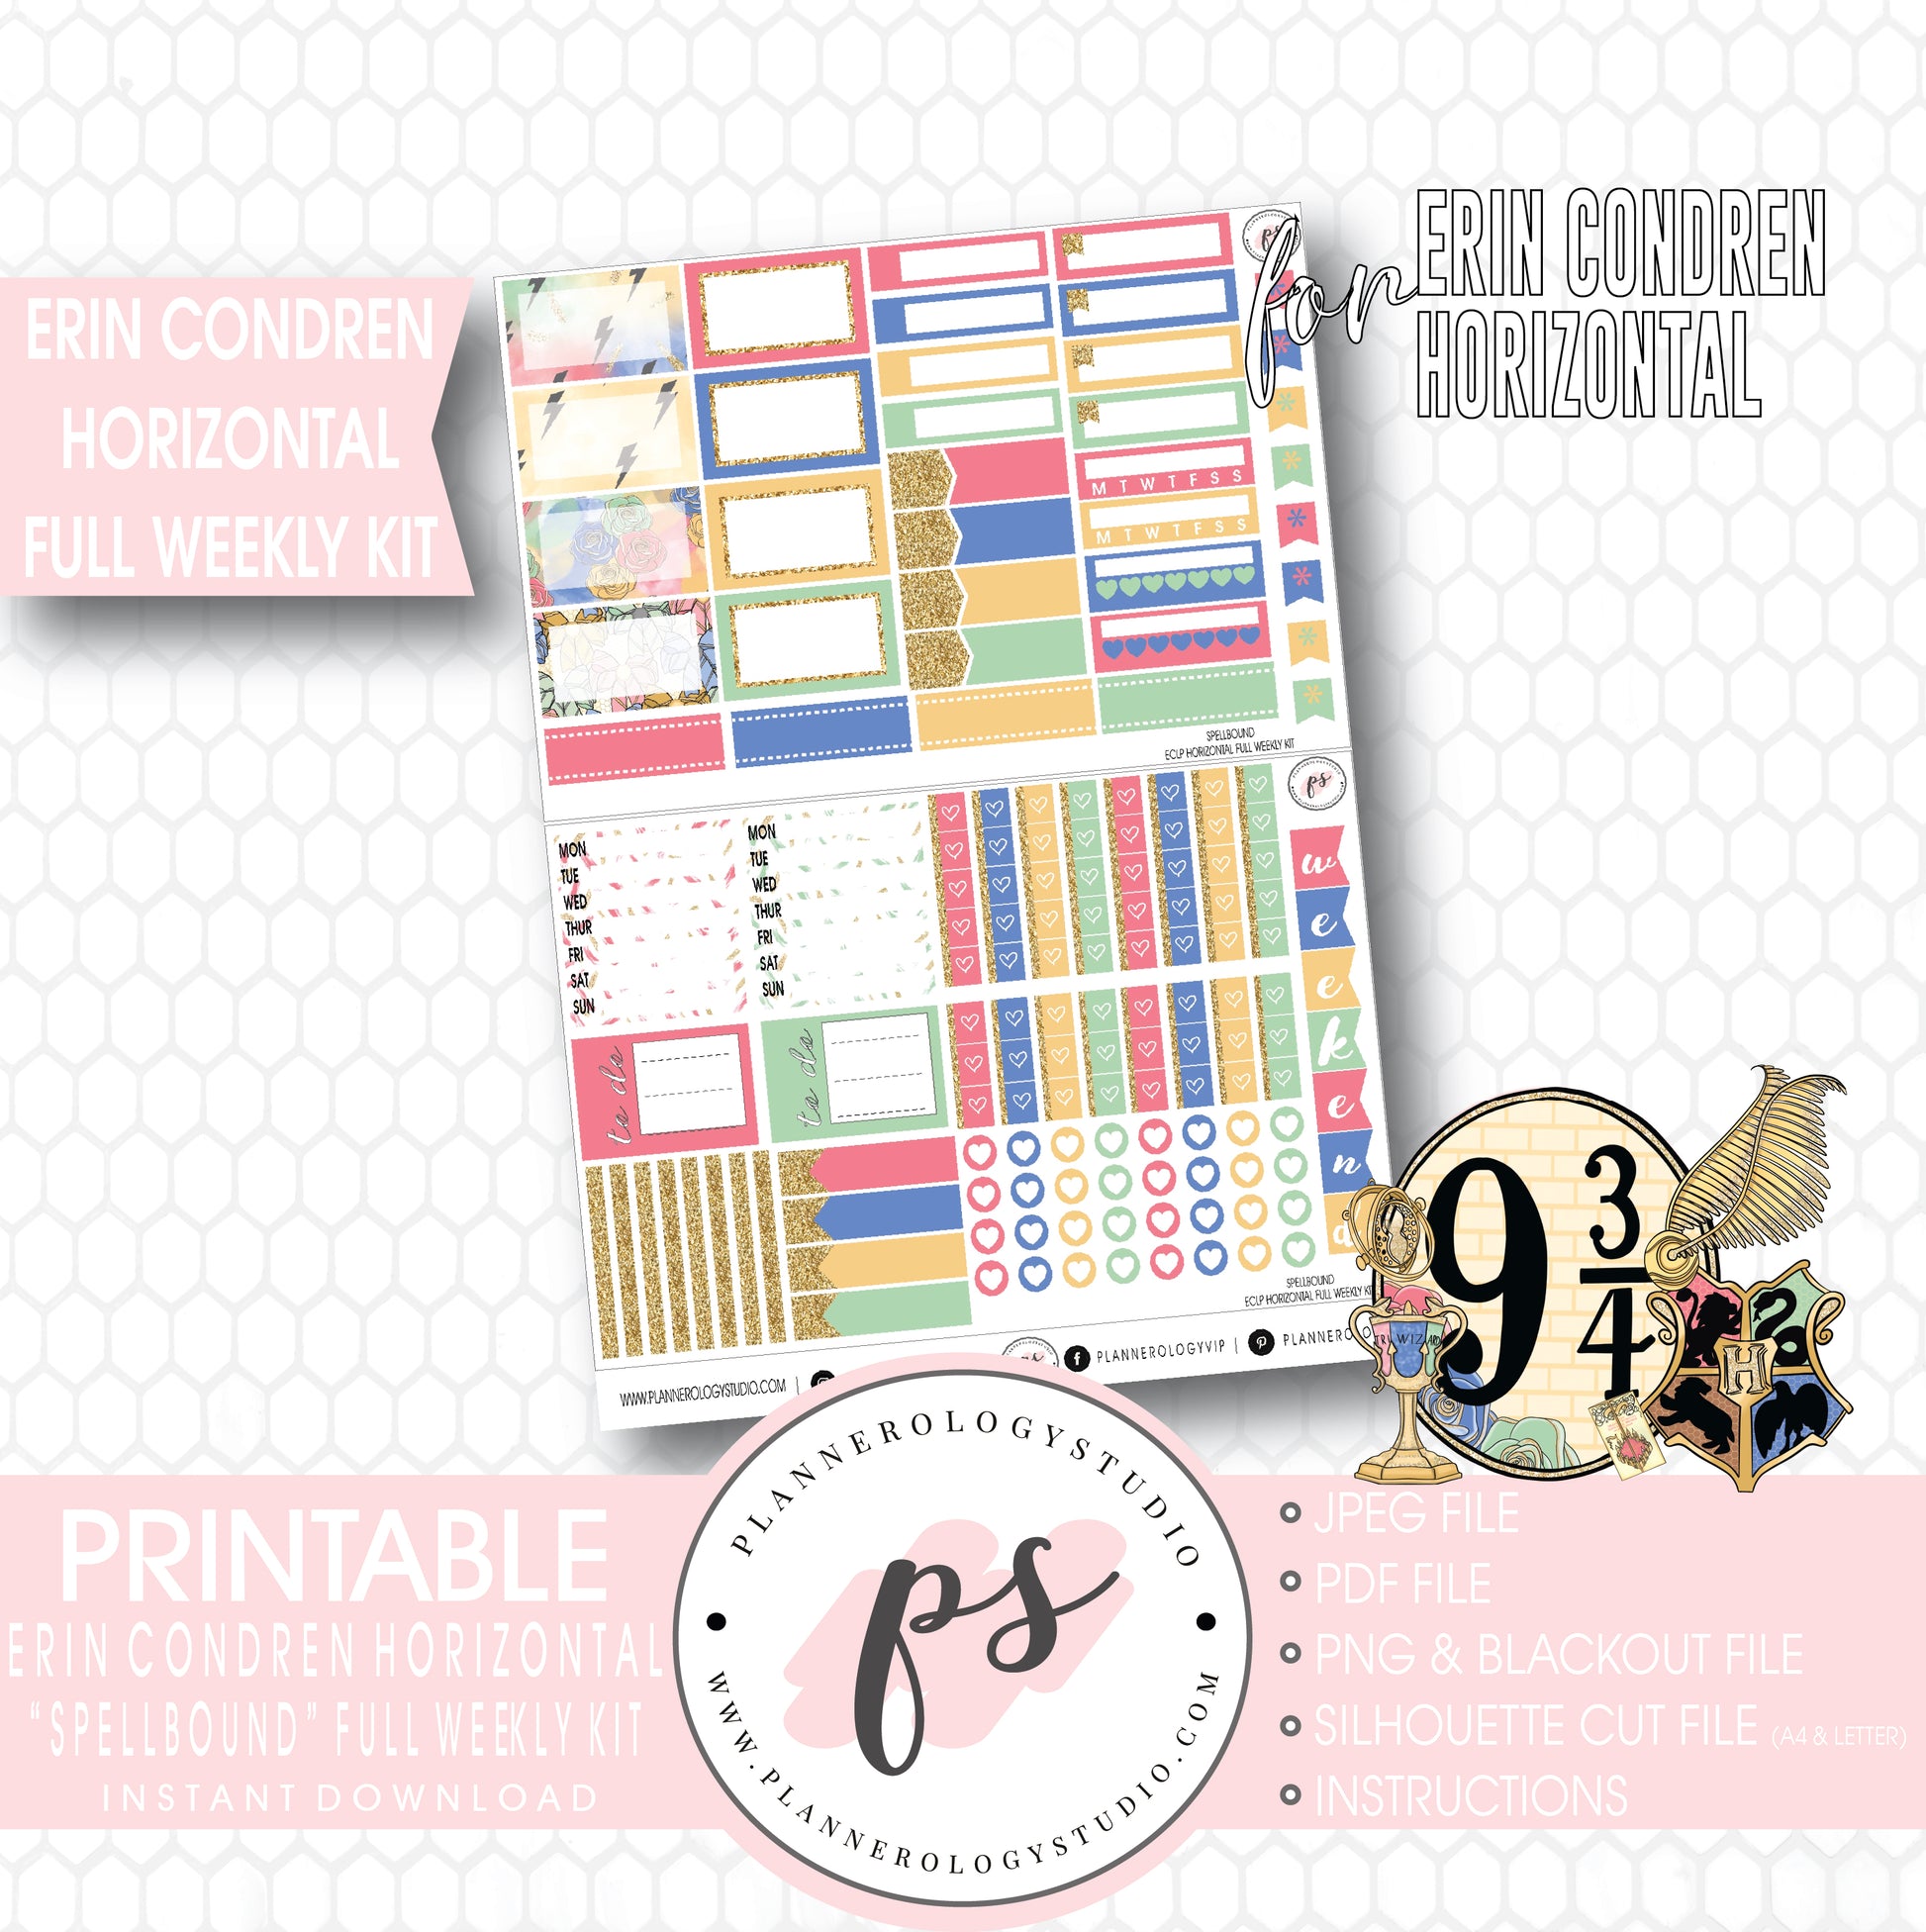 Spellbound (Harry Potter) Full Weekly Kit Printable Planner Stickers (for use with ECLP Horizontal) - Plannerologystudio